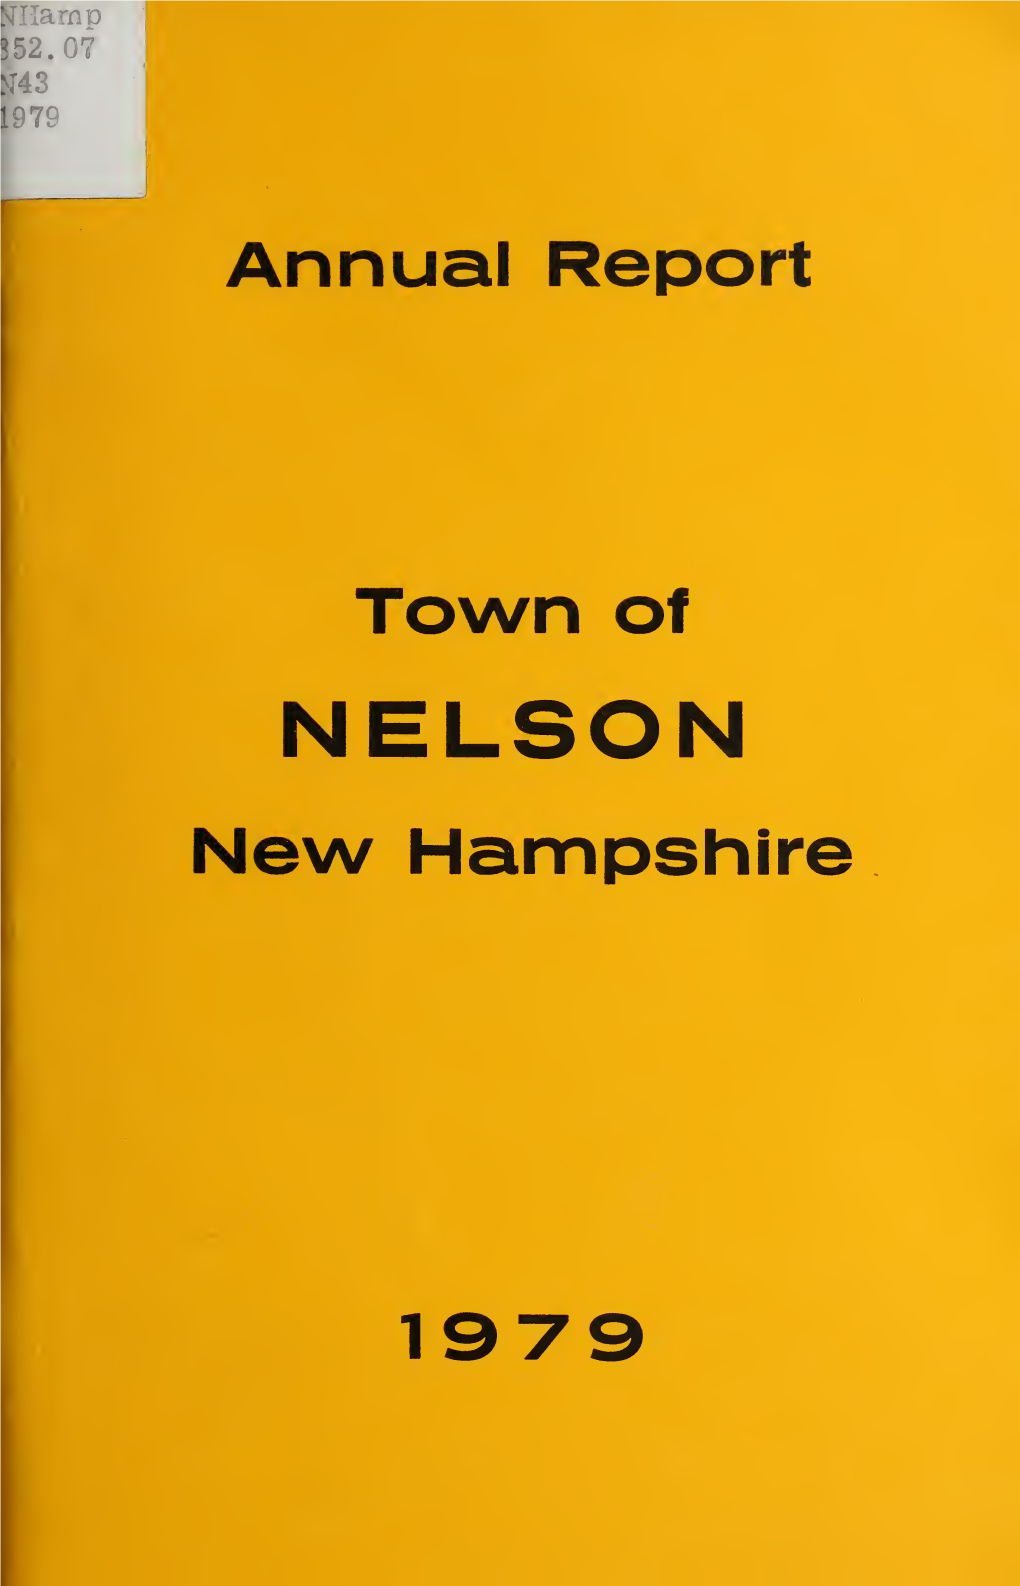 Annual Report of the Town of Nelson, New Hampshire